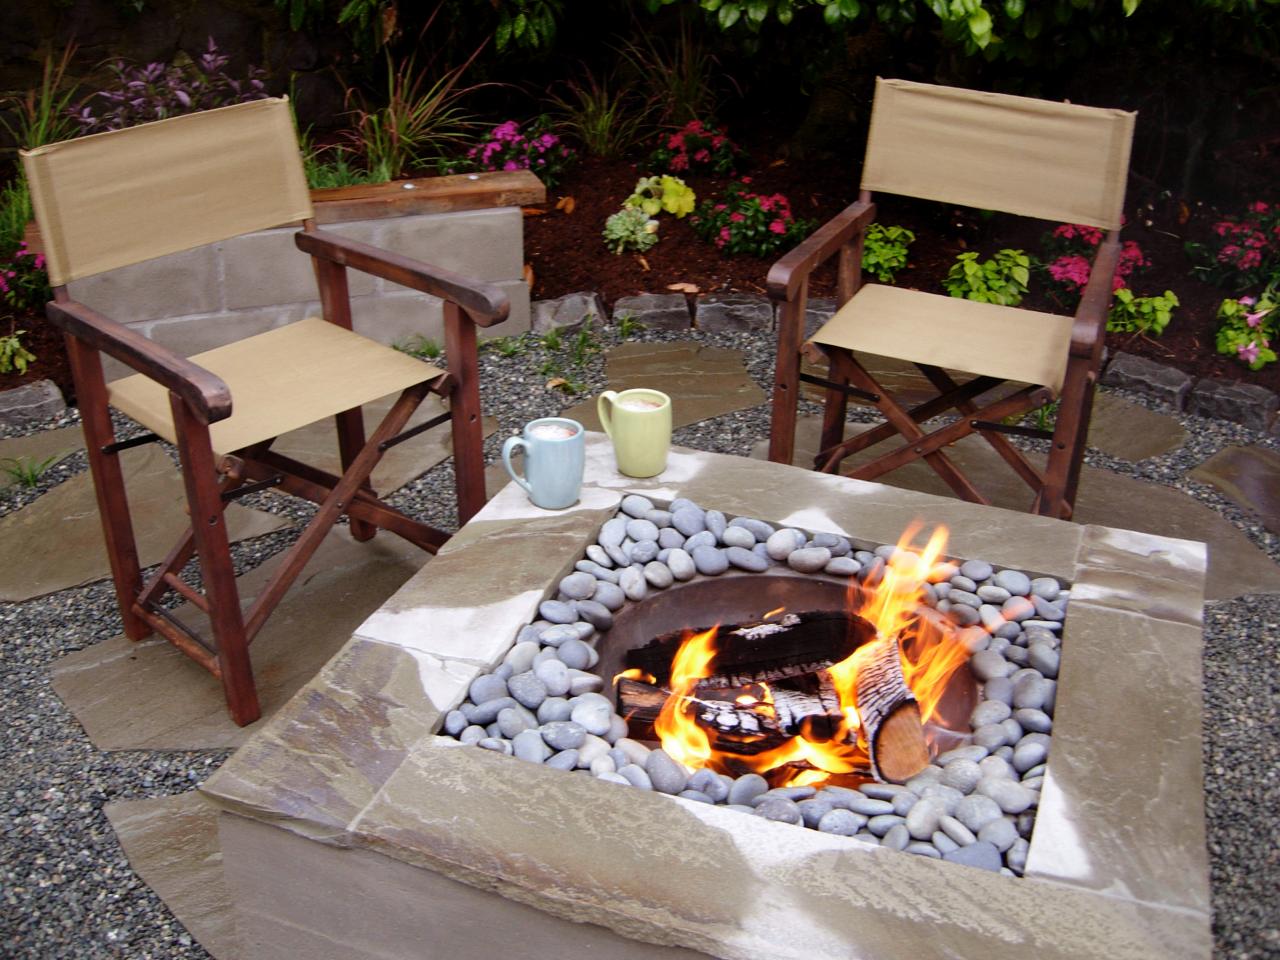 How To Make A Concrete Fire Feature - How To Make A Fire Pit On Concrete Patio